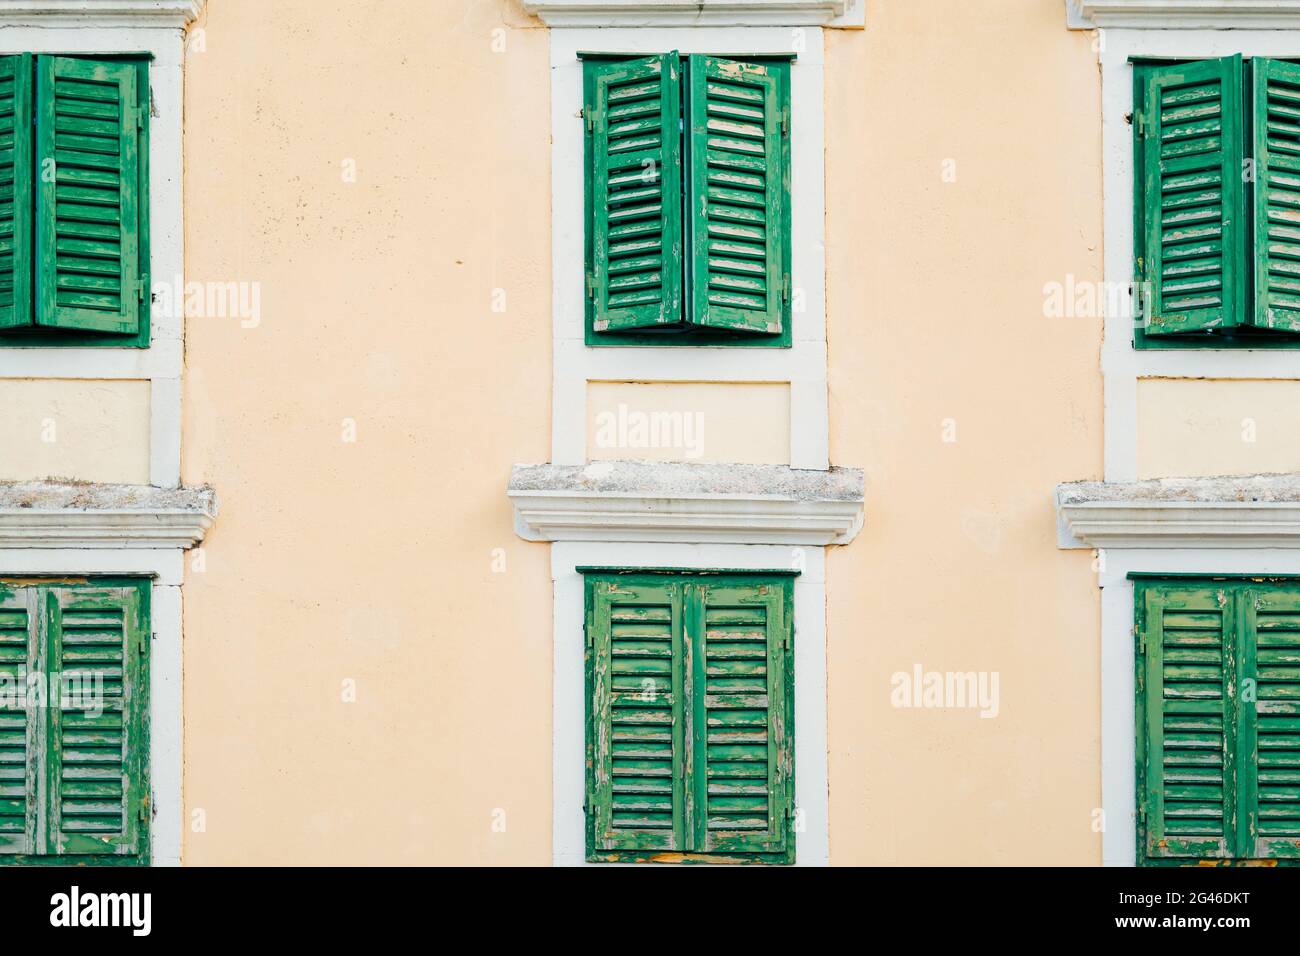 Green window shutters. The facade of houses Stock Photo